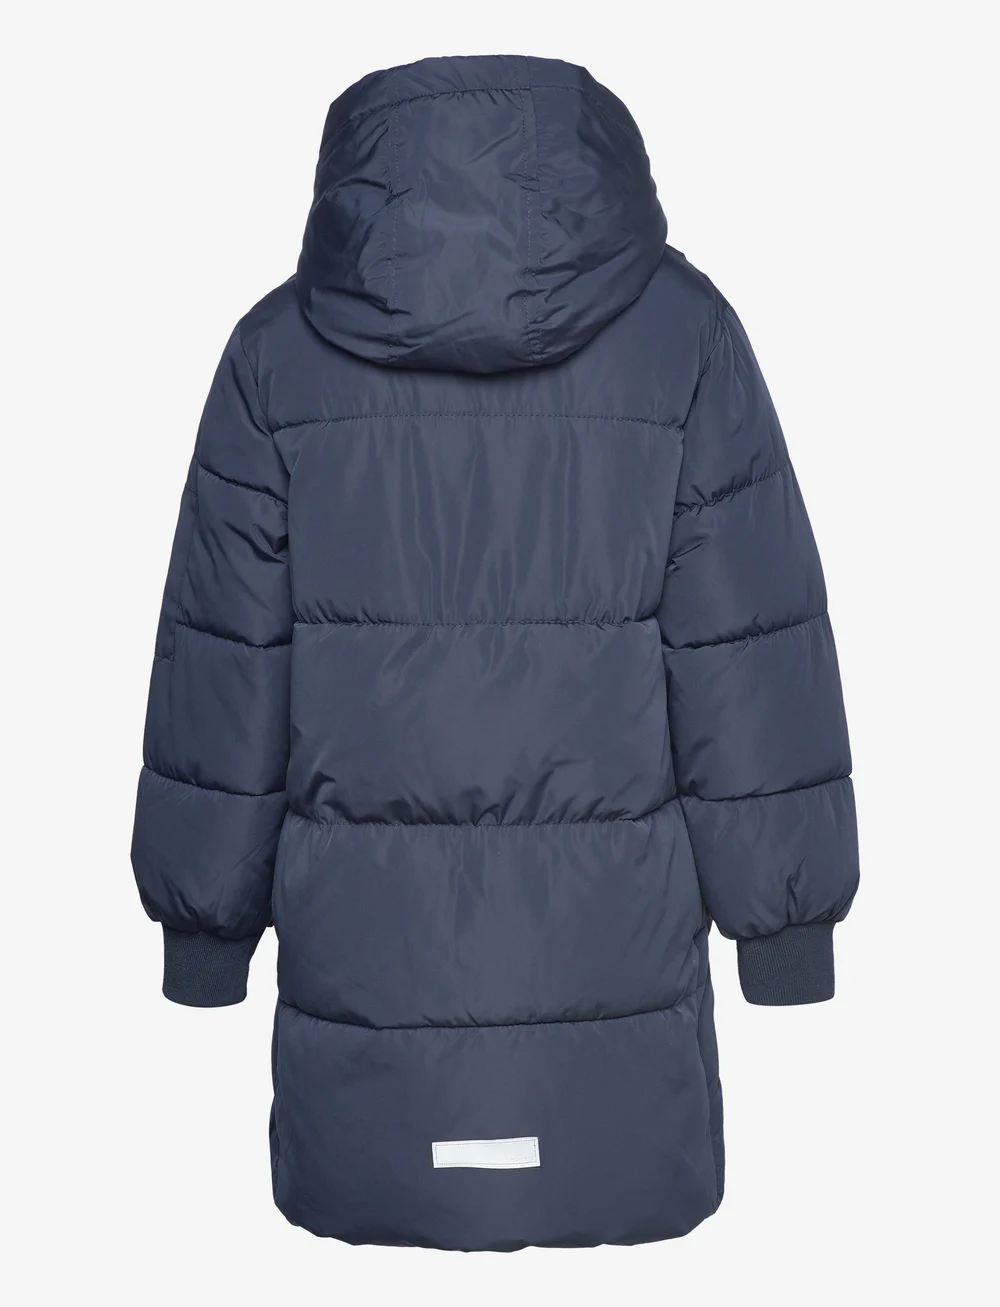 name it Nkfmuso Long Puffer Jacket Camp - 18.80 €. Buy Puffer & Padded from  name it online at Boozt.com. Fast delivery and easy returns